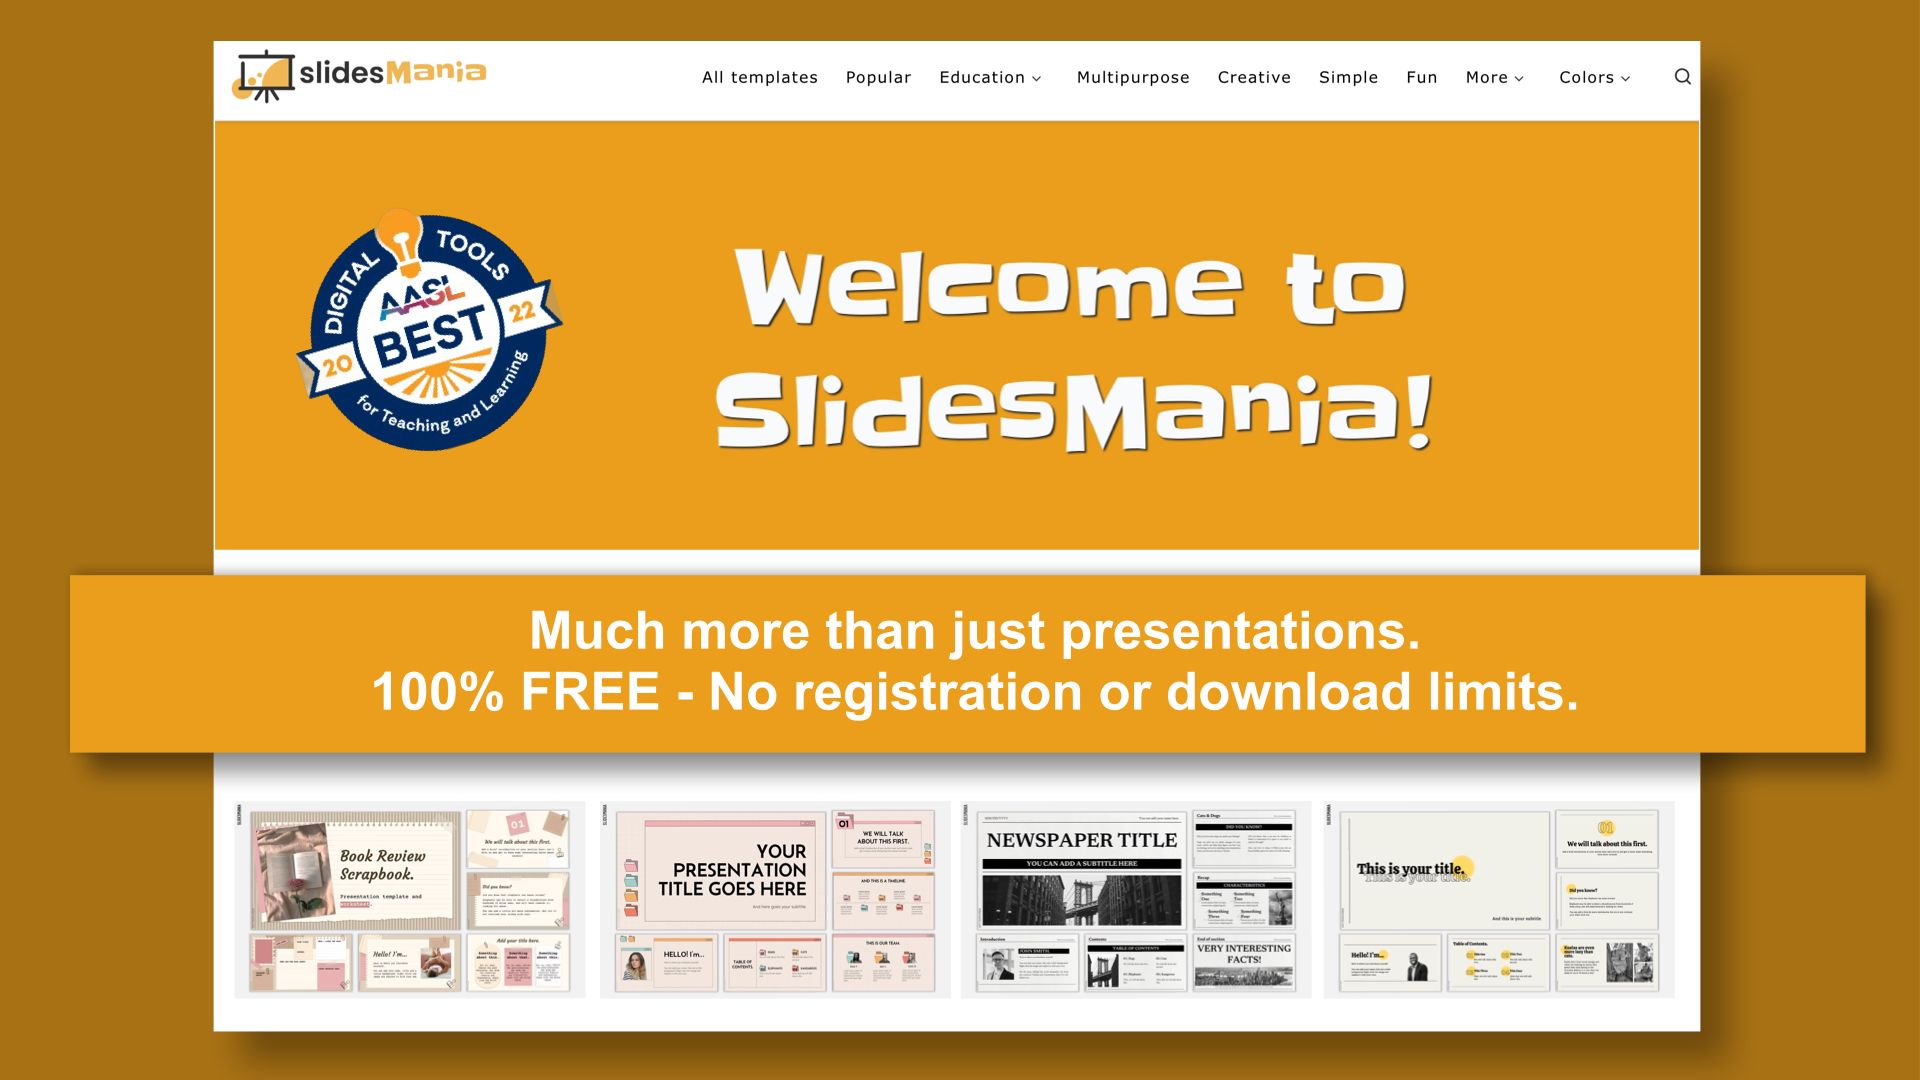 Free customizable templates for Games for Google Slides or PowerPoint - SlidesMania